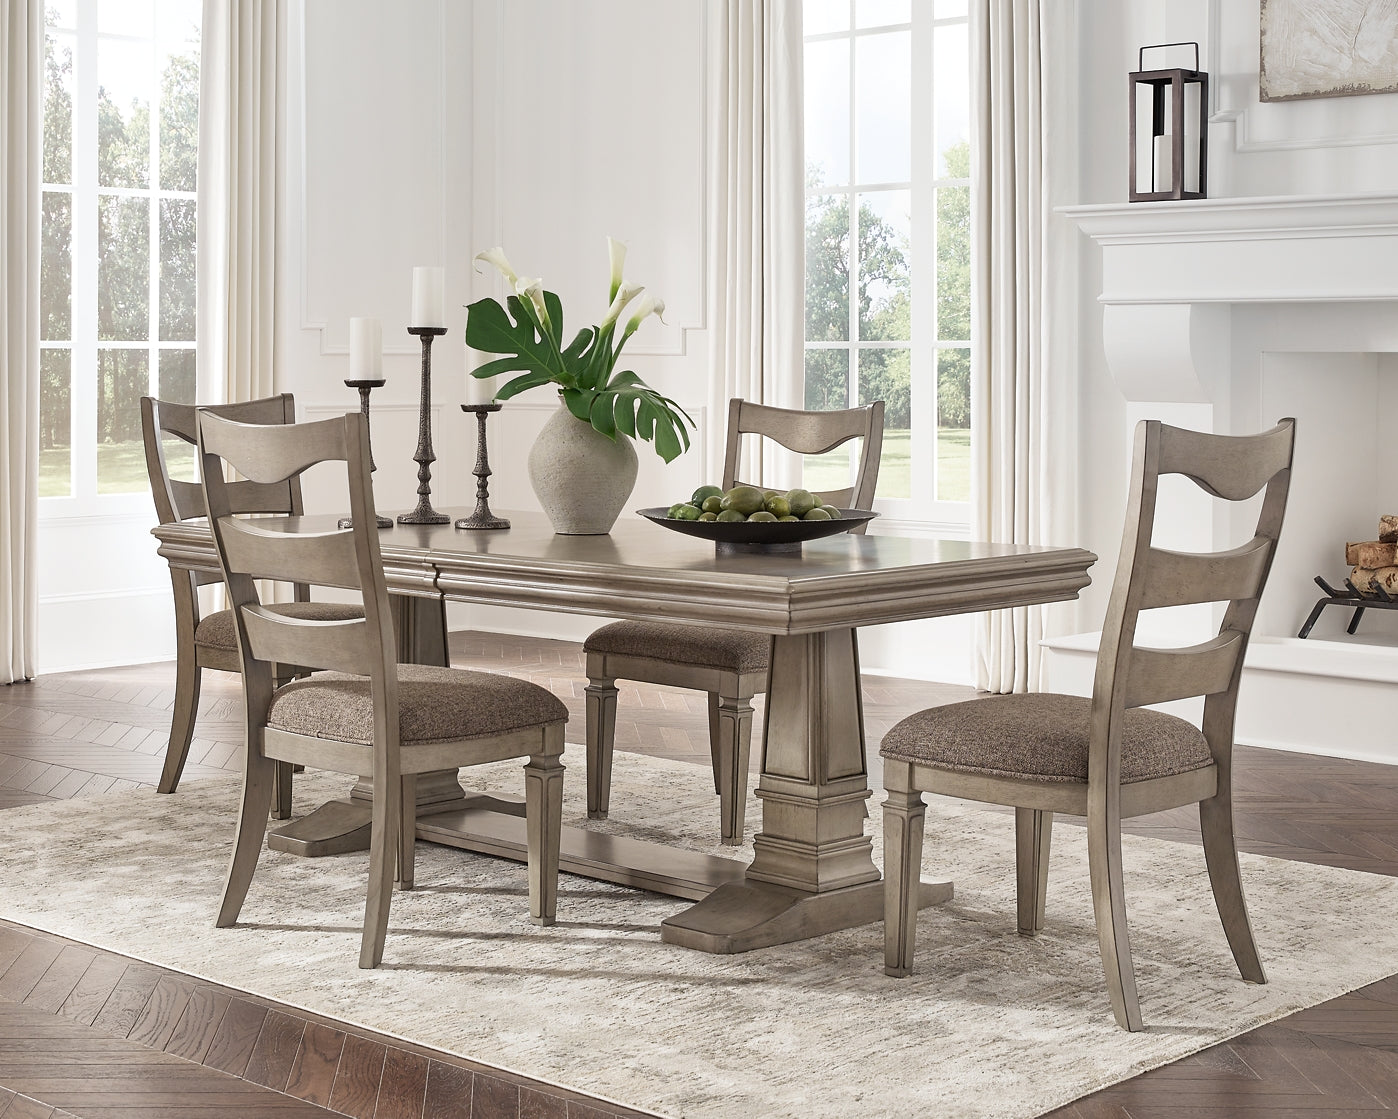 Lexorne Dining Table and 4 Chairs Wilson Furniture (OH)  in Bridgeport, Ohio. Serving Bridgeport, Yorkville, Bellaire, & Avondale